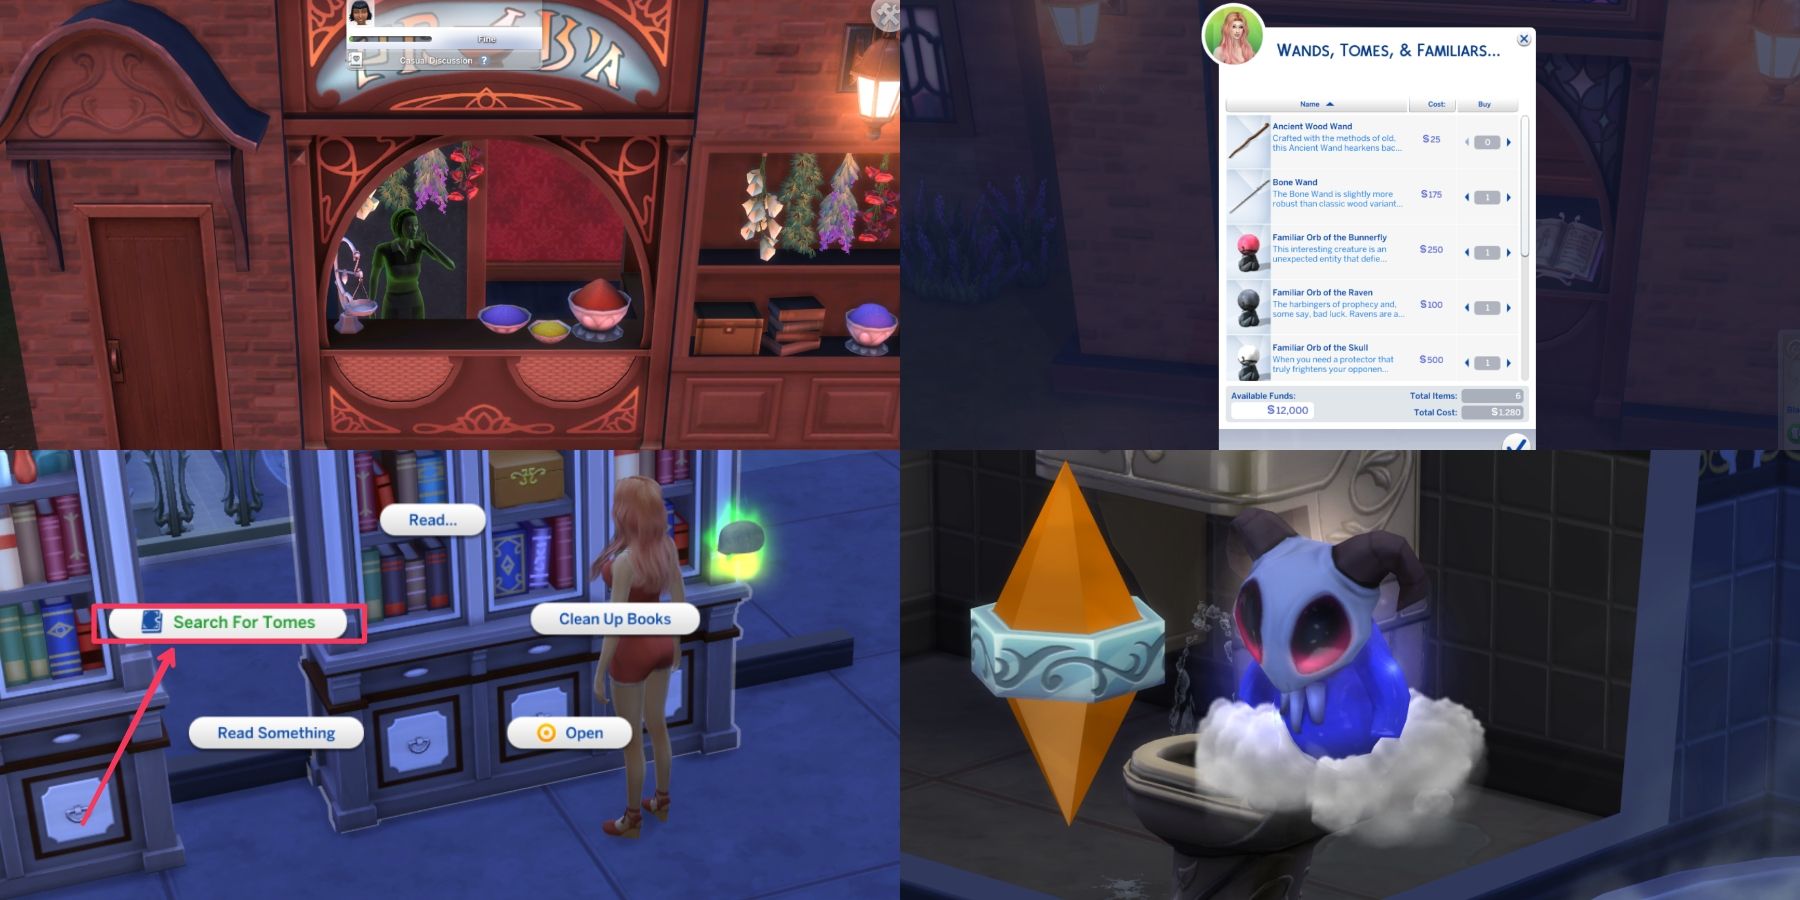 Spellcasters' objects and a familiar in the sims 4